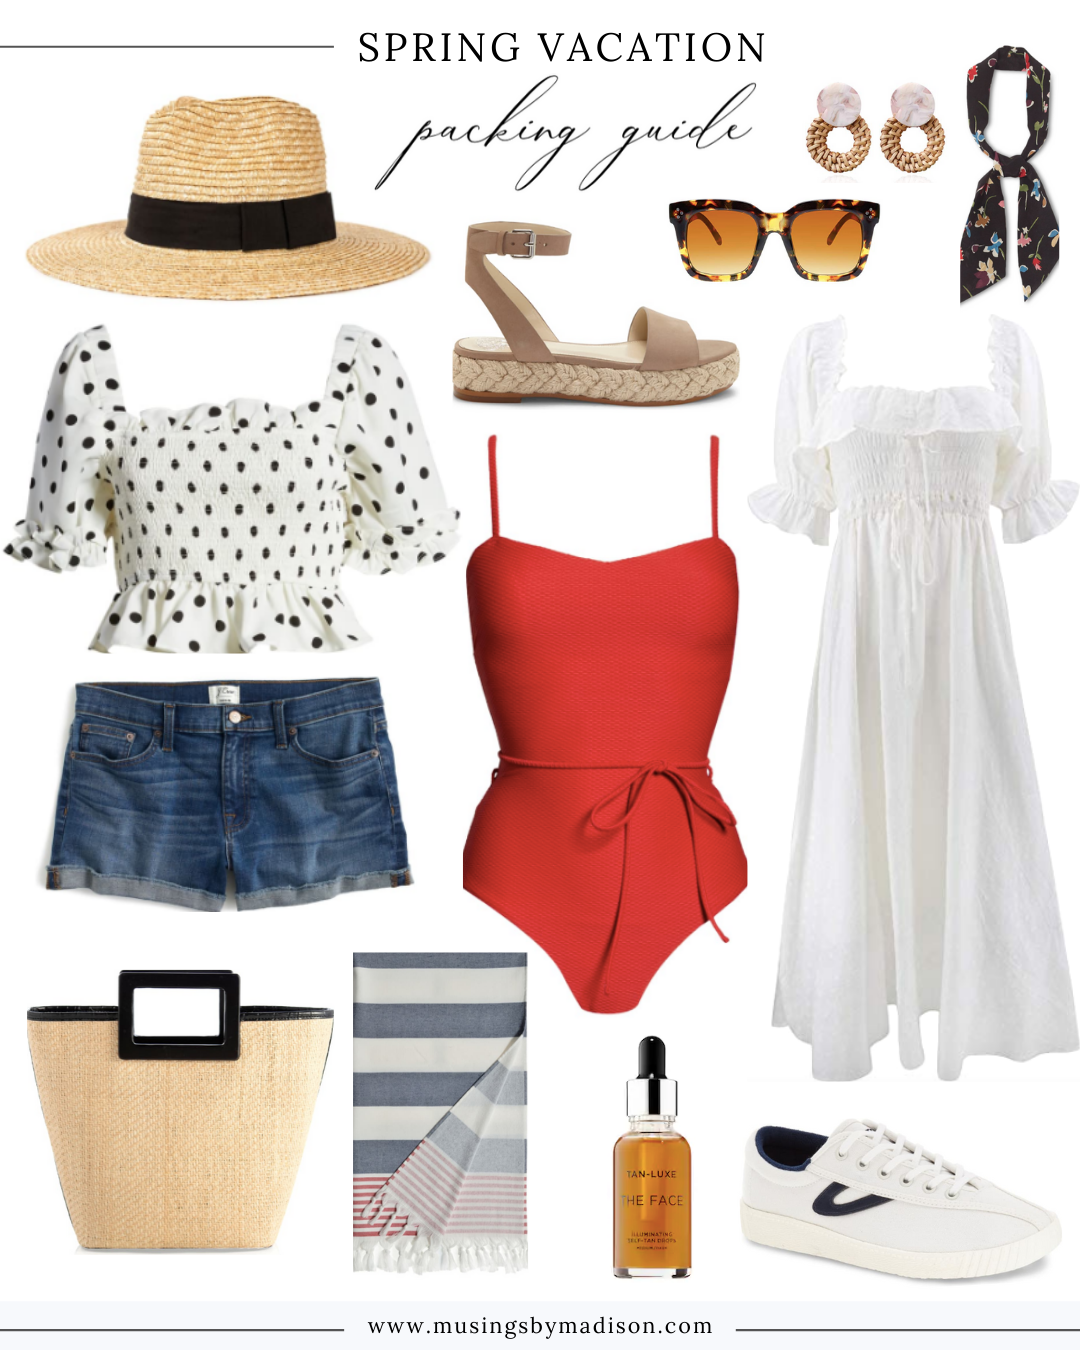 spring vacation packing guide